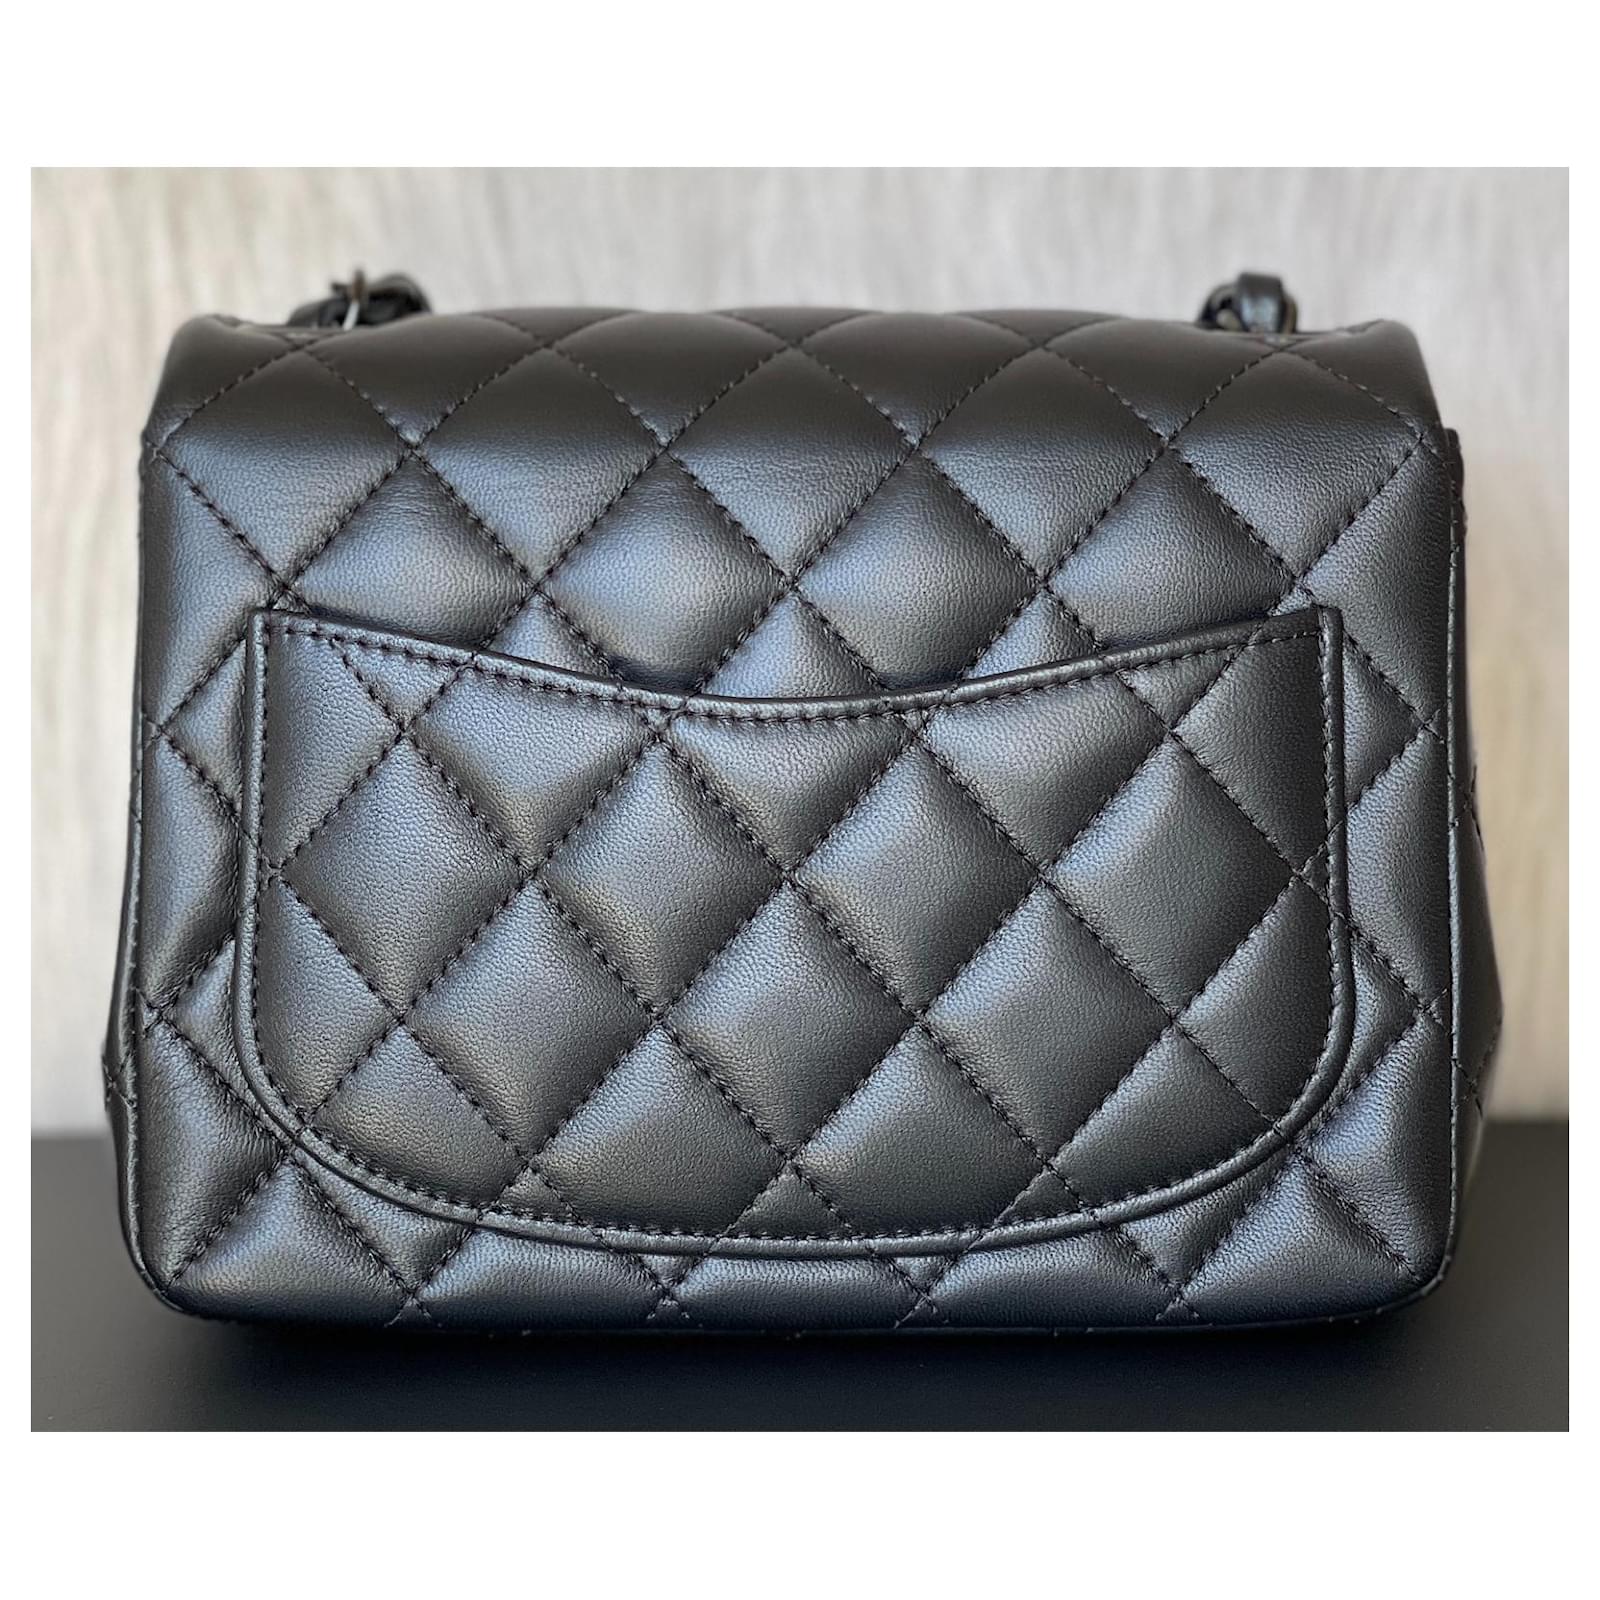 Timeless Chanel Classic Quilted So Black Lambskin Square Mini Flap